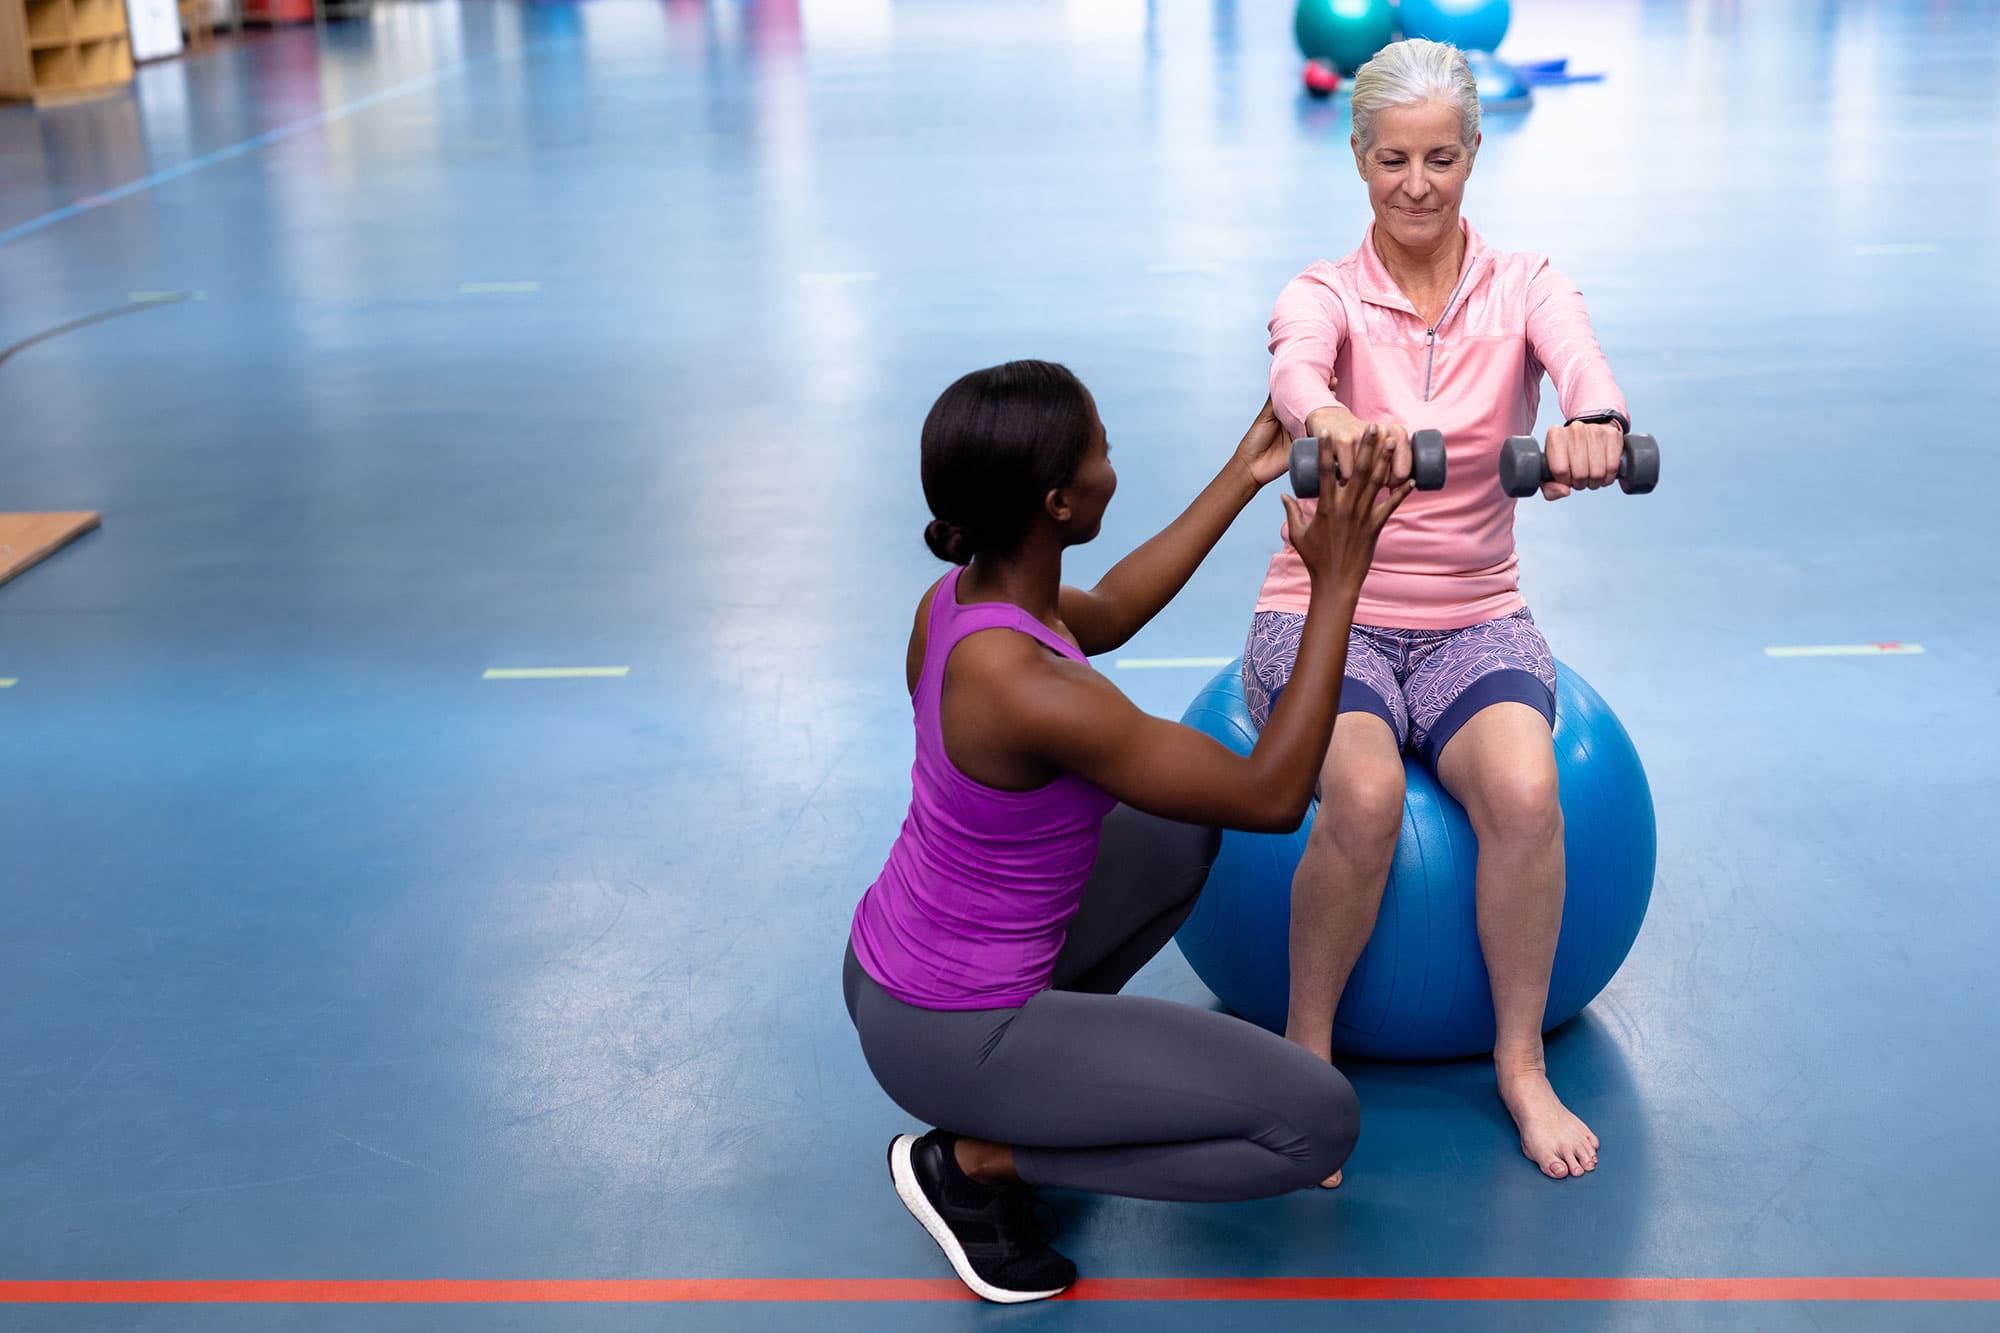 The PM called on fitness support, now our ageing nation needs the same